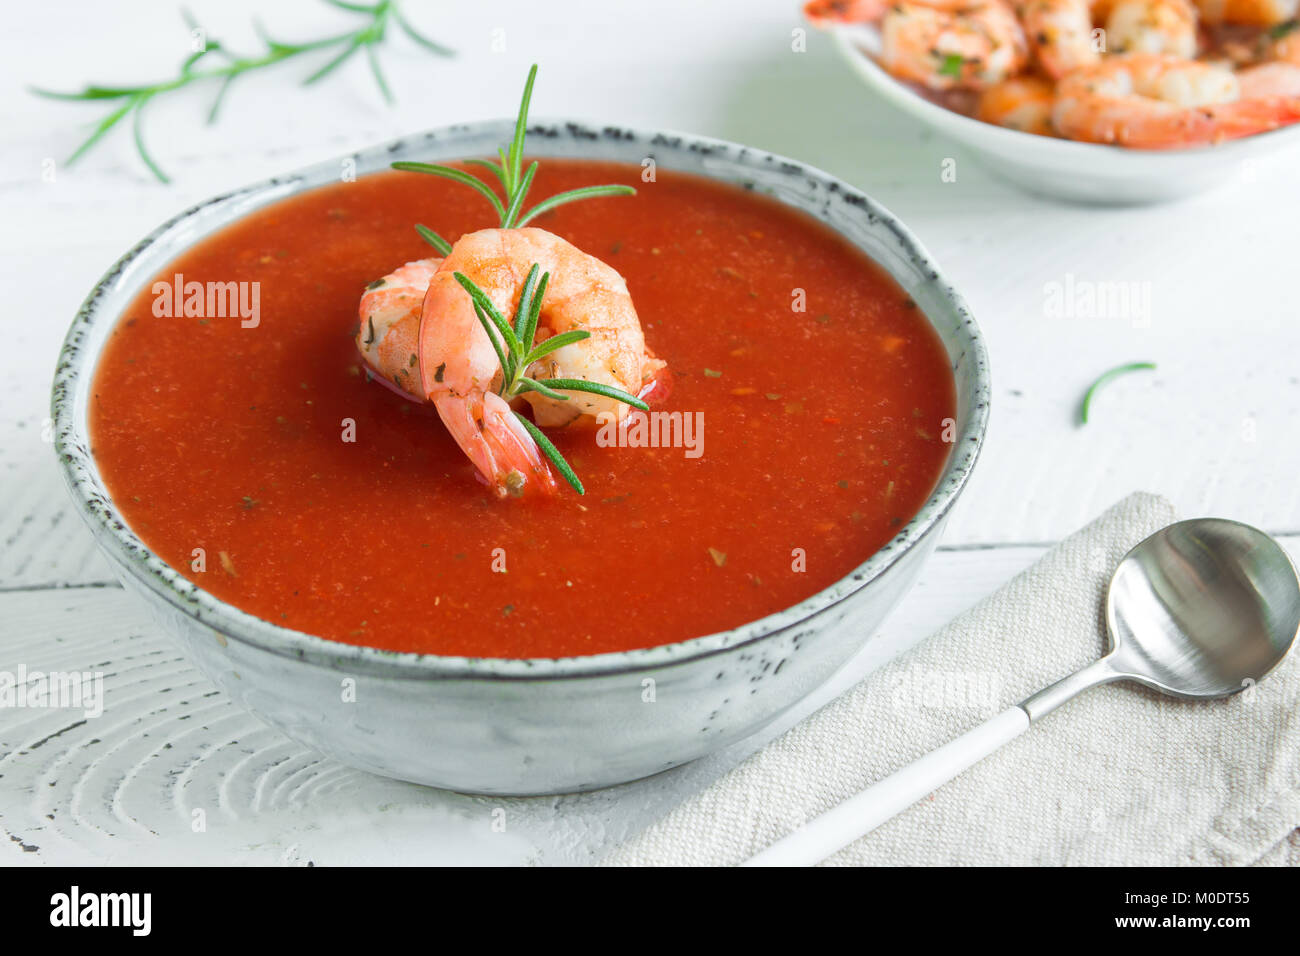 Vegetable tomato soup gazpacho with shrimps (prawns) and rosemary in bowl on white wooden background, top view, copy space. Stock Photo